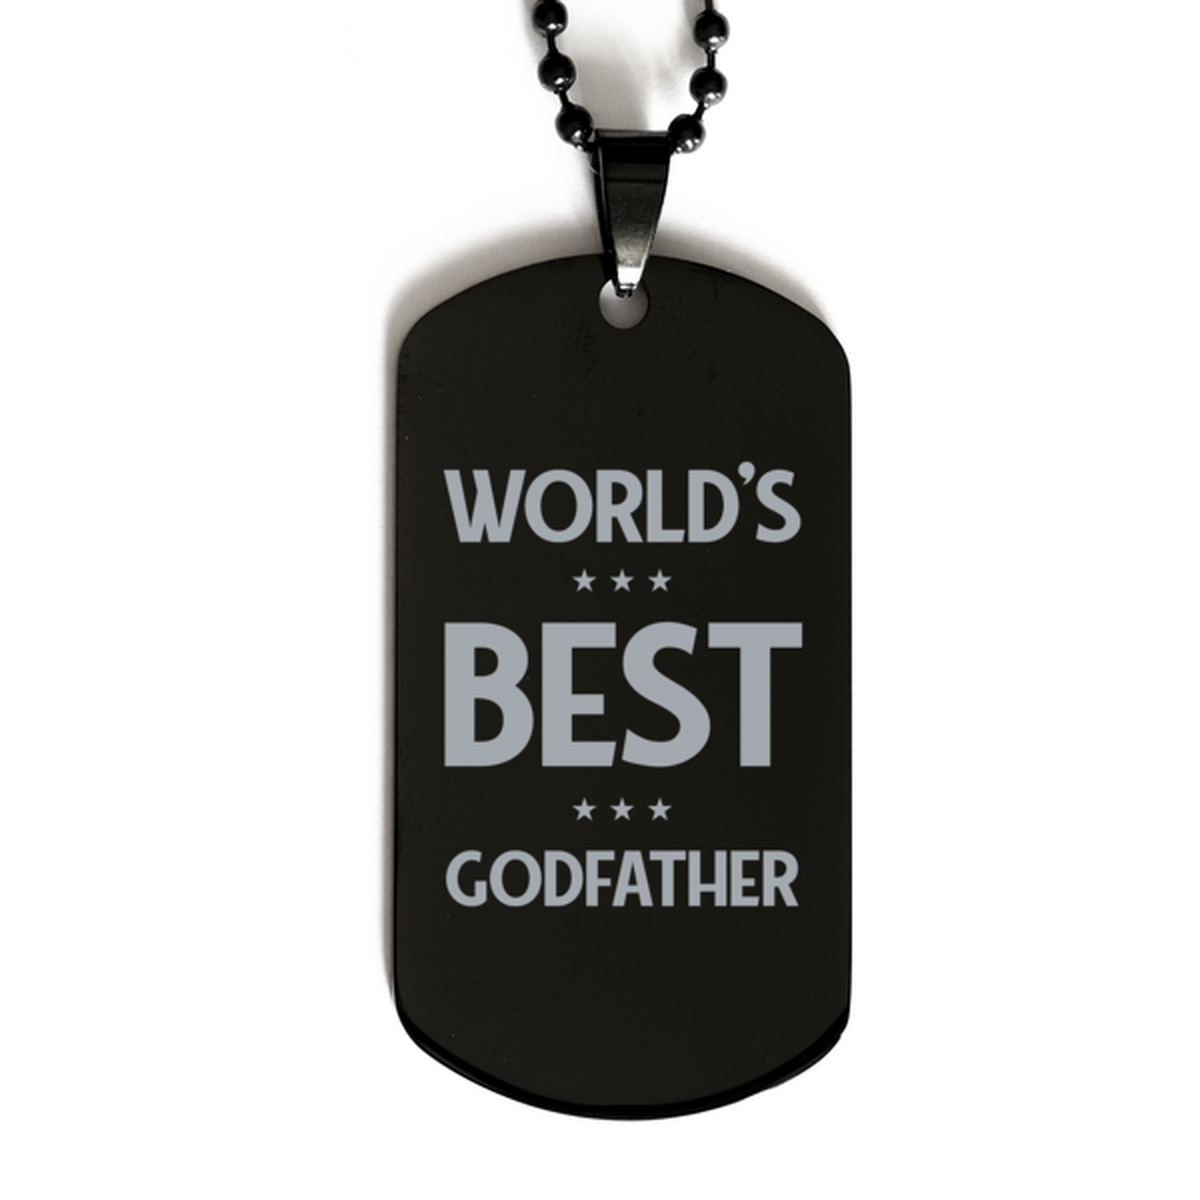 Worlds Best Godfather Gifts, Funny Black Engraved Dog Tag For Godfather, Birthday Presents For Men